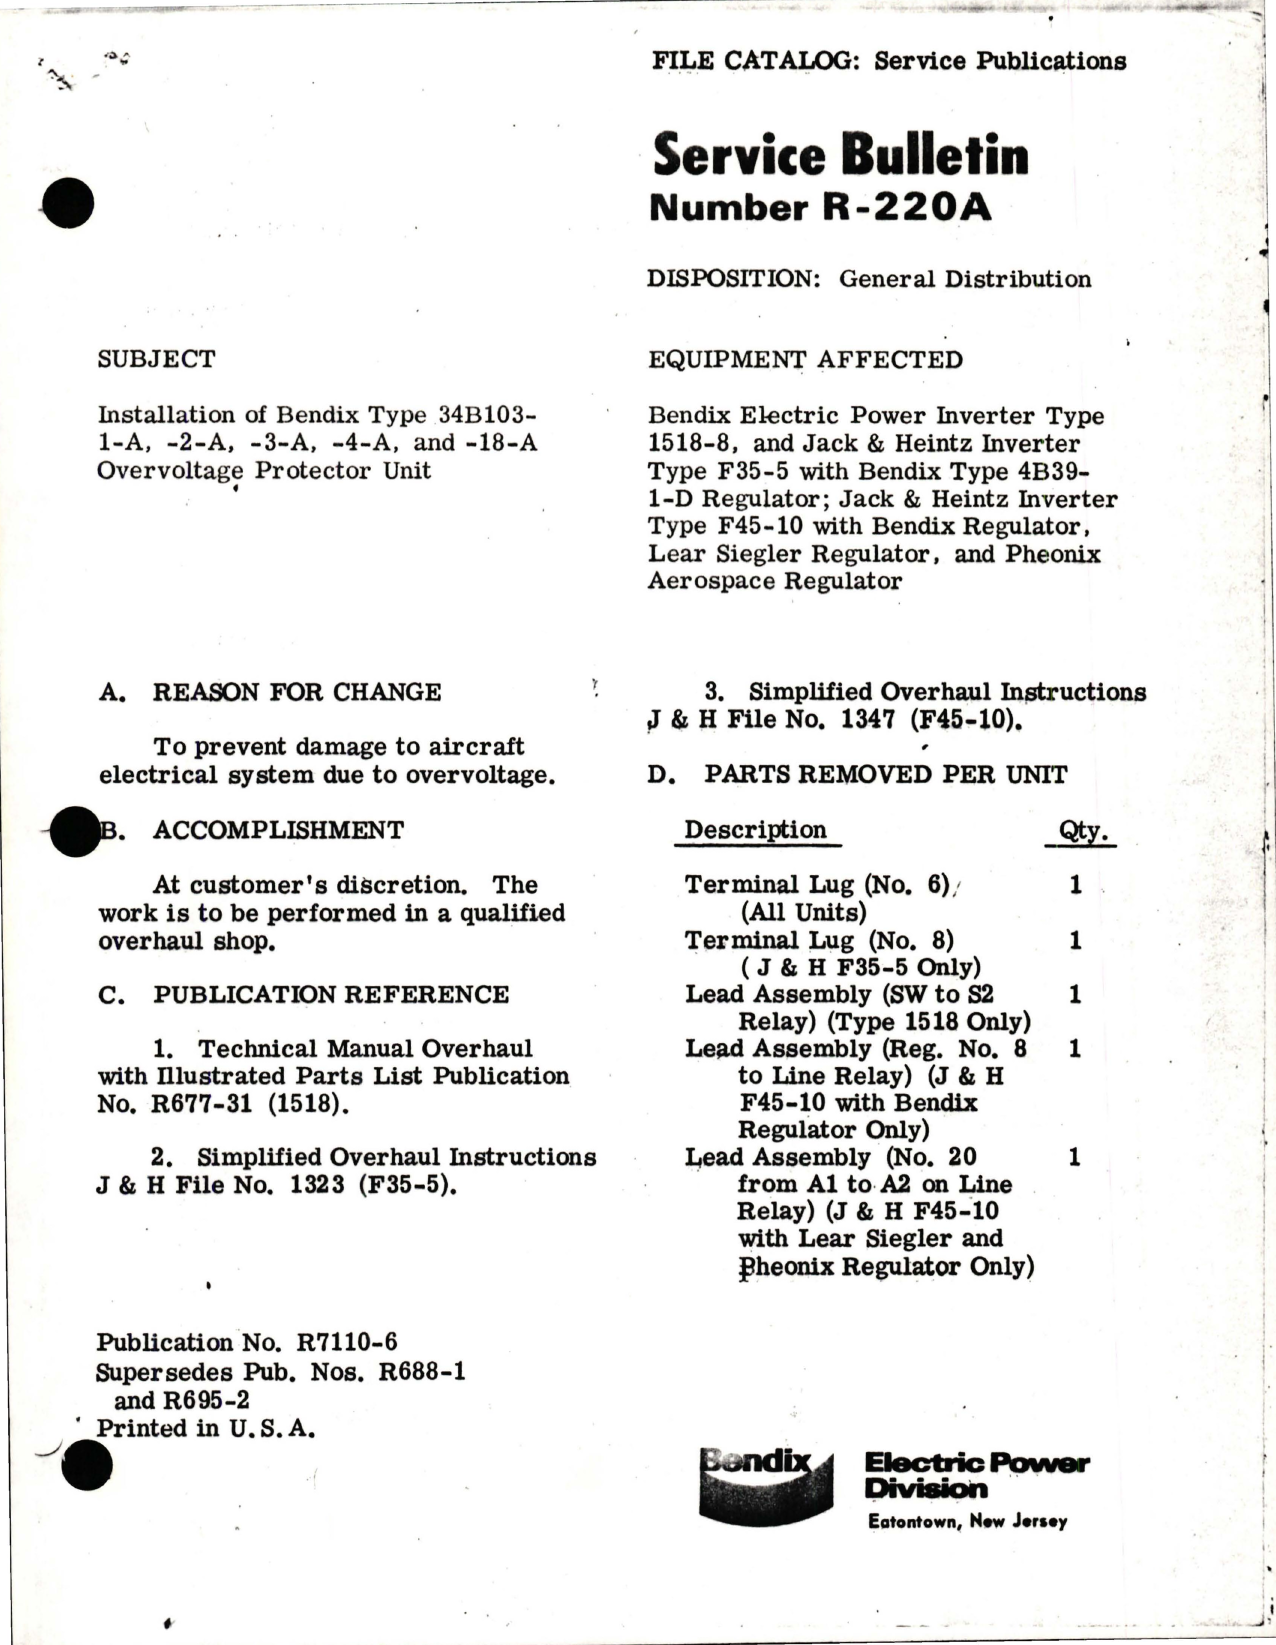 Sample page 1 from AirCorps Library document: Installation of Bendix Types 34B103-1A, 34B103-2-A, 34B103-3-A, 34B103-4-A, and 34B103-18-A Overvoltage Protector Unit for Electric Power Inverter